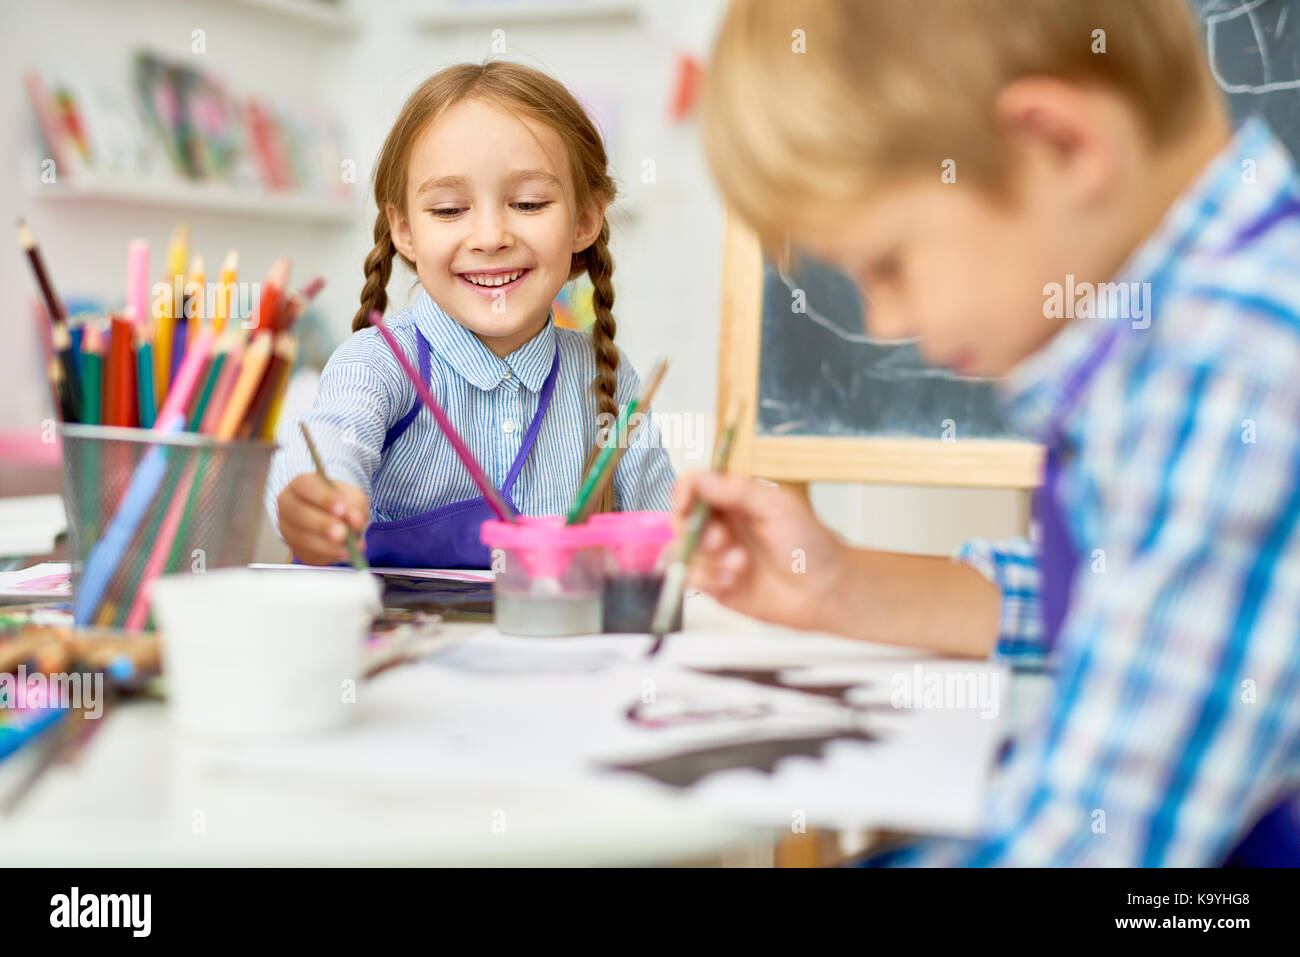 Portrait of adorable little girl smiling happily while enjoying art and craft lesson in pre school working together with boy Stock Photo